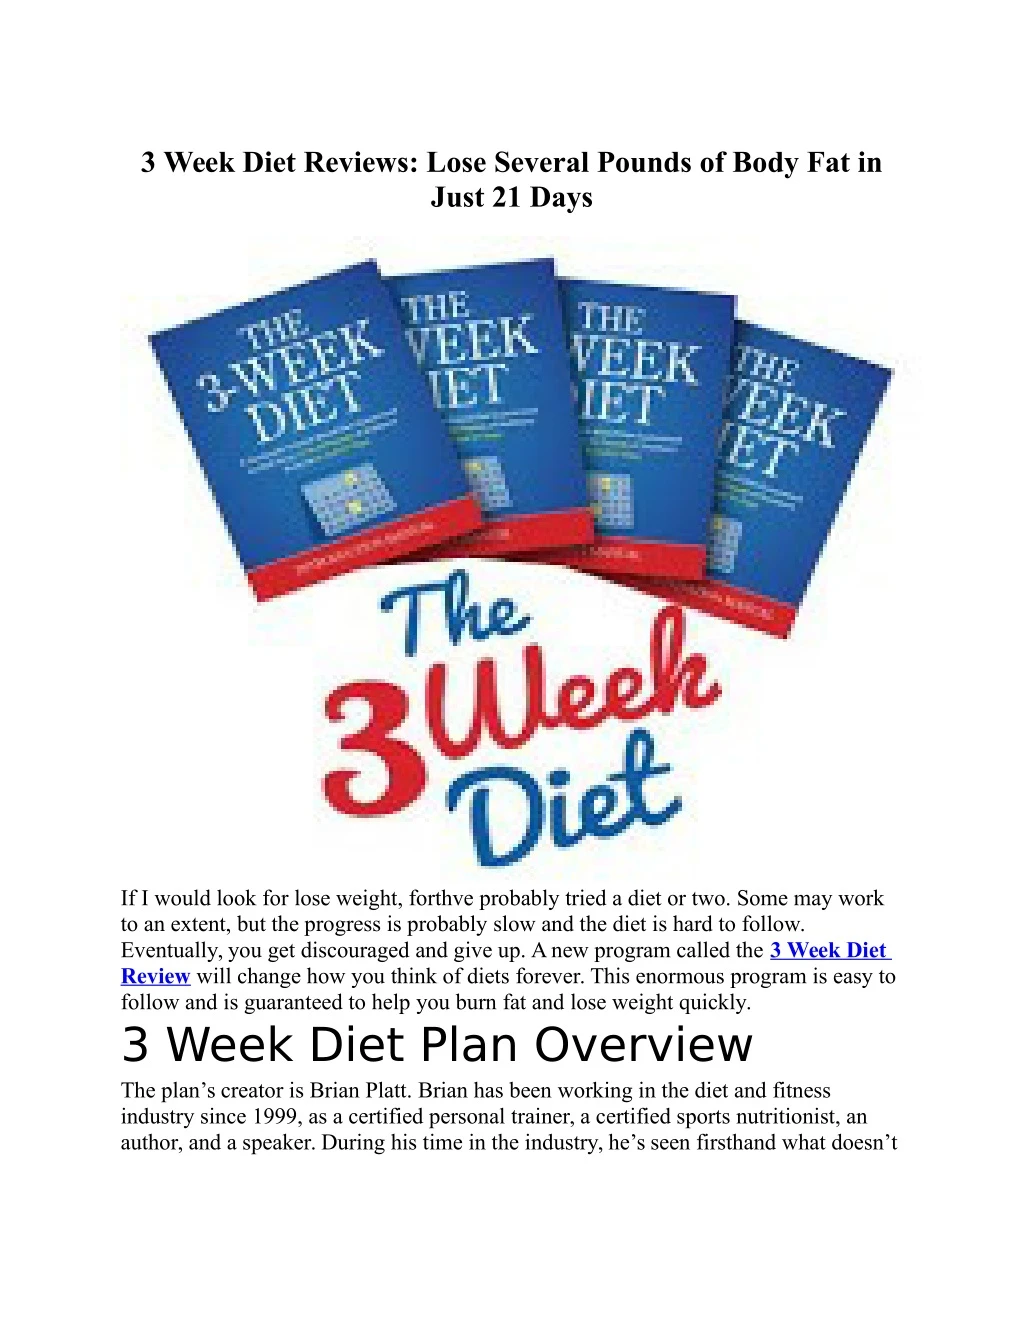 3 week diet reviews lose several pounds of body